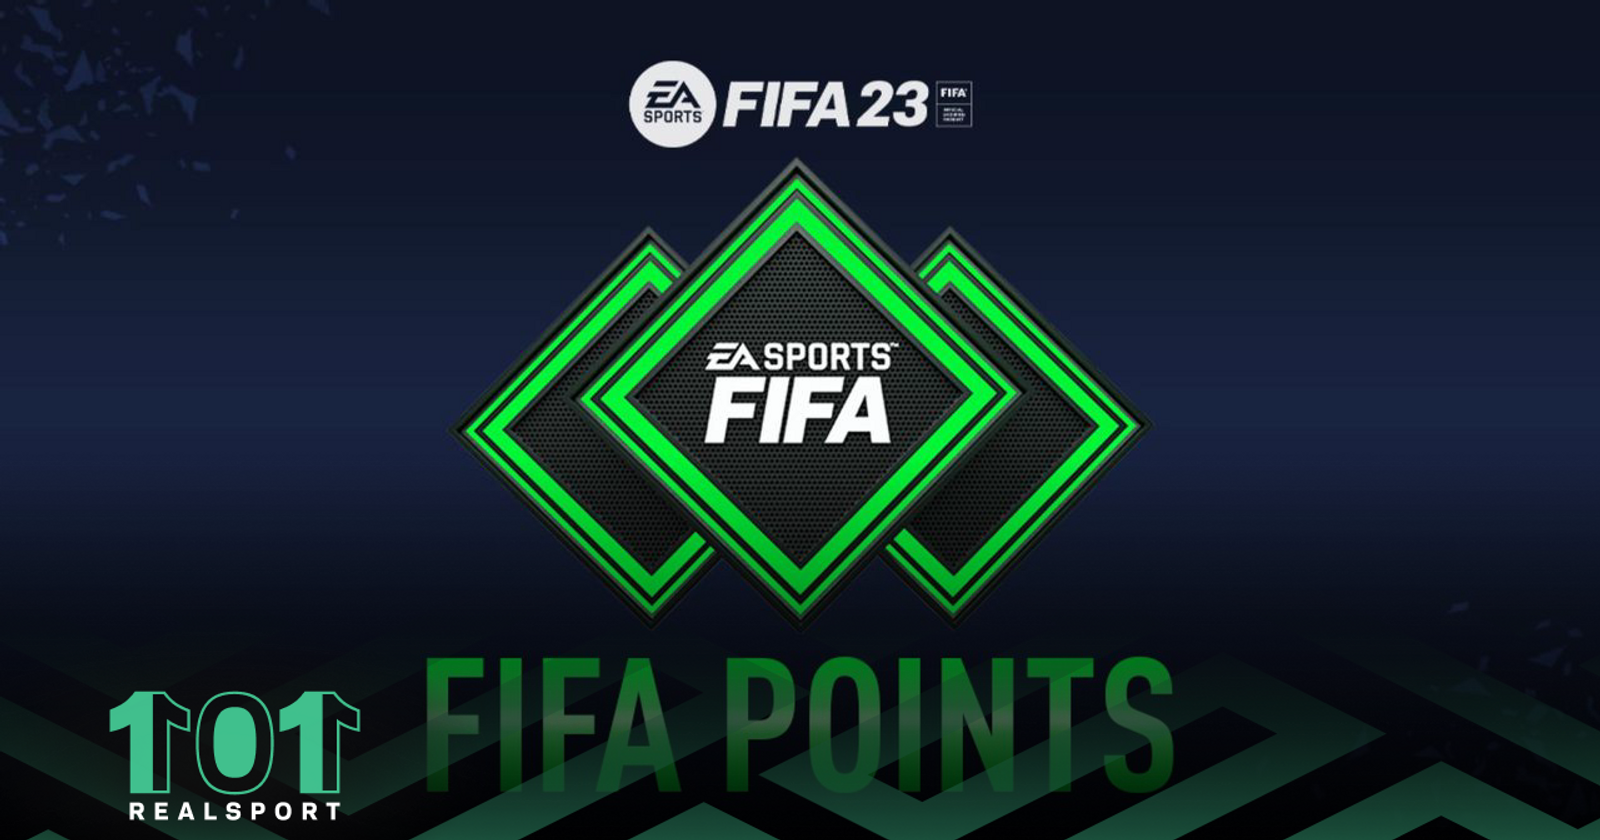 How To Buy FIFA Points On FIFA 23 Web App